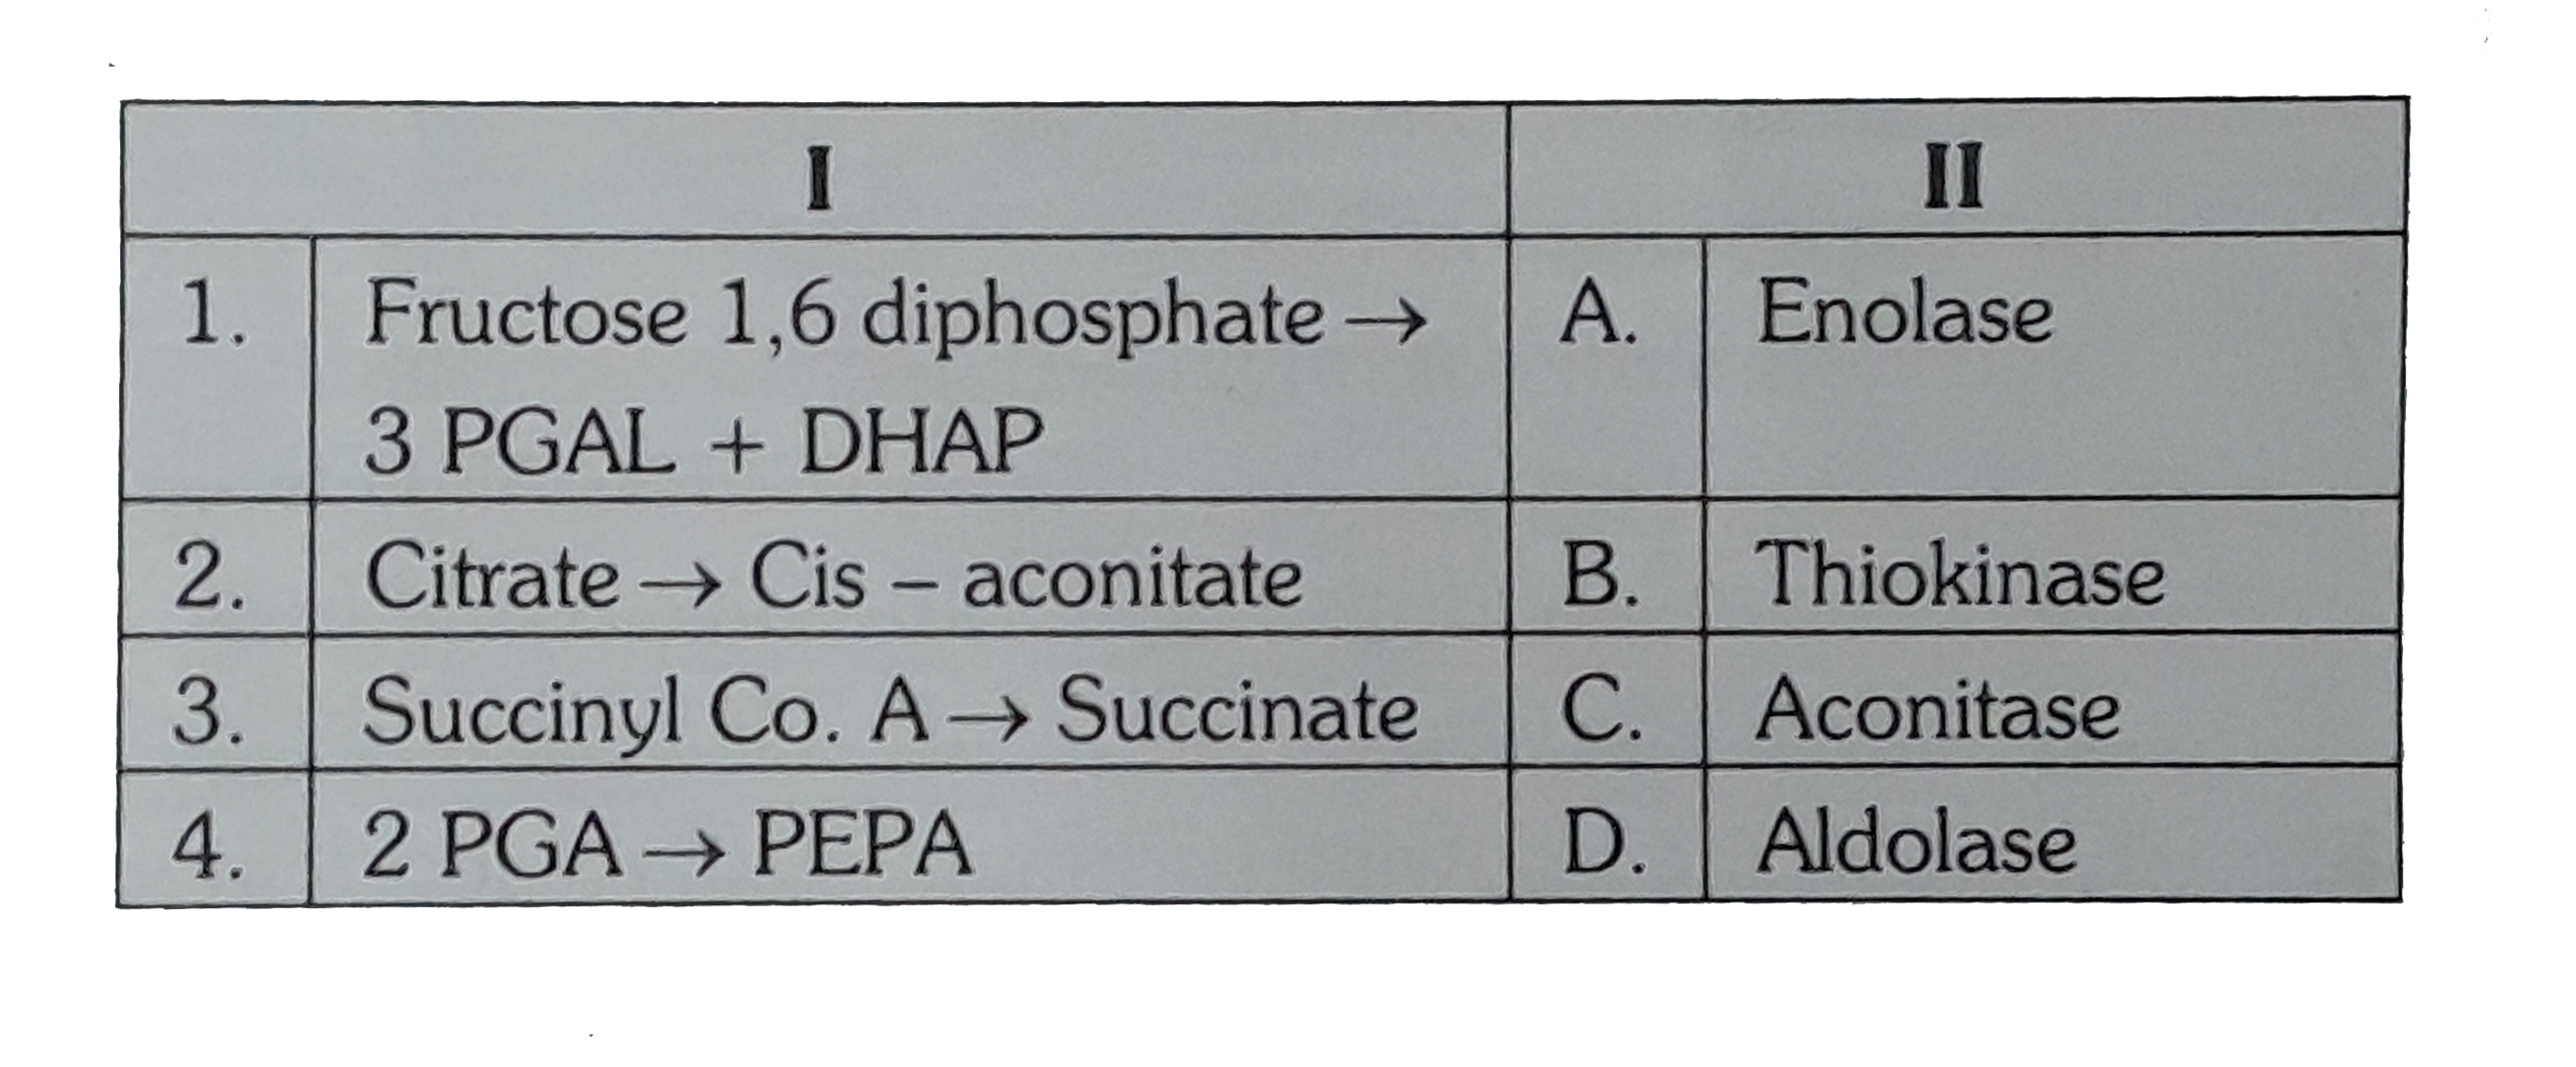 Given below are some reactions and the enzymes involved. Identify the correct pairs.